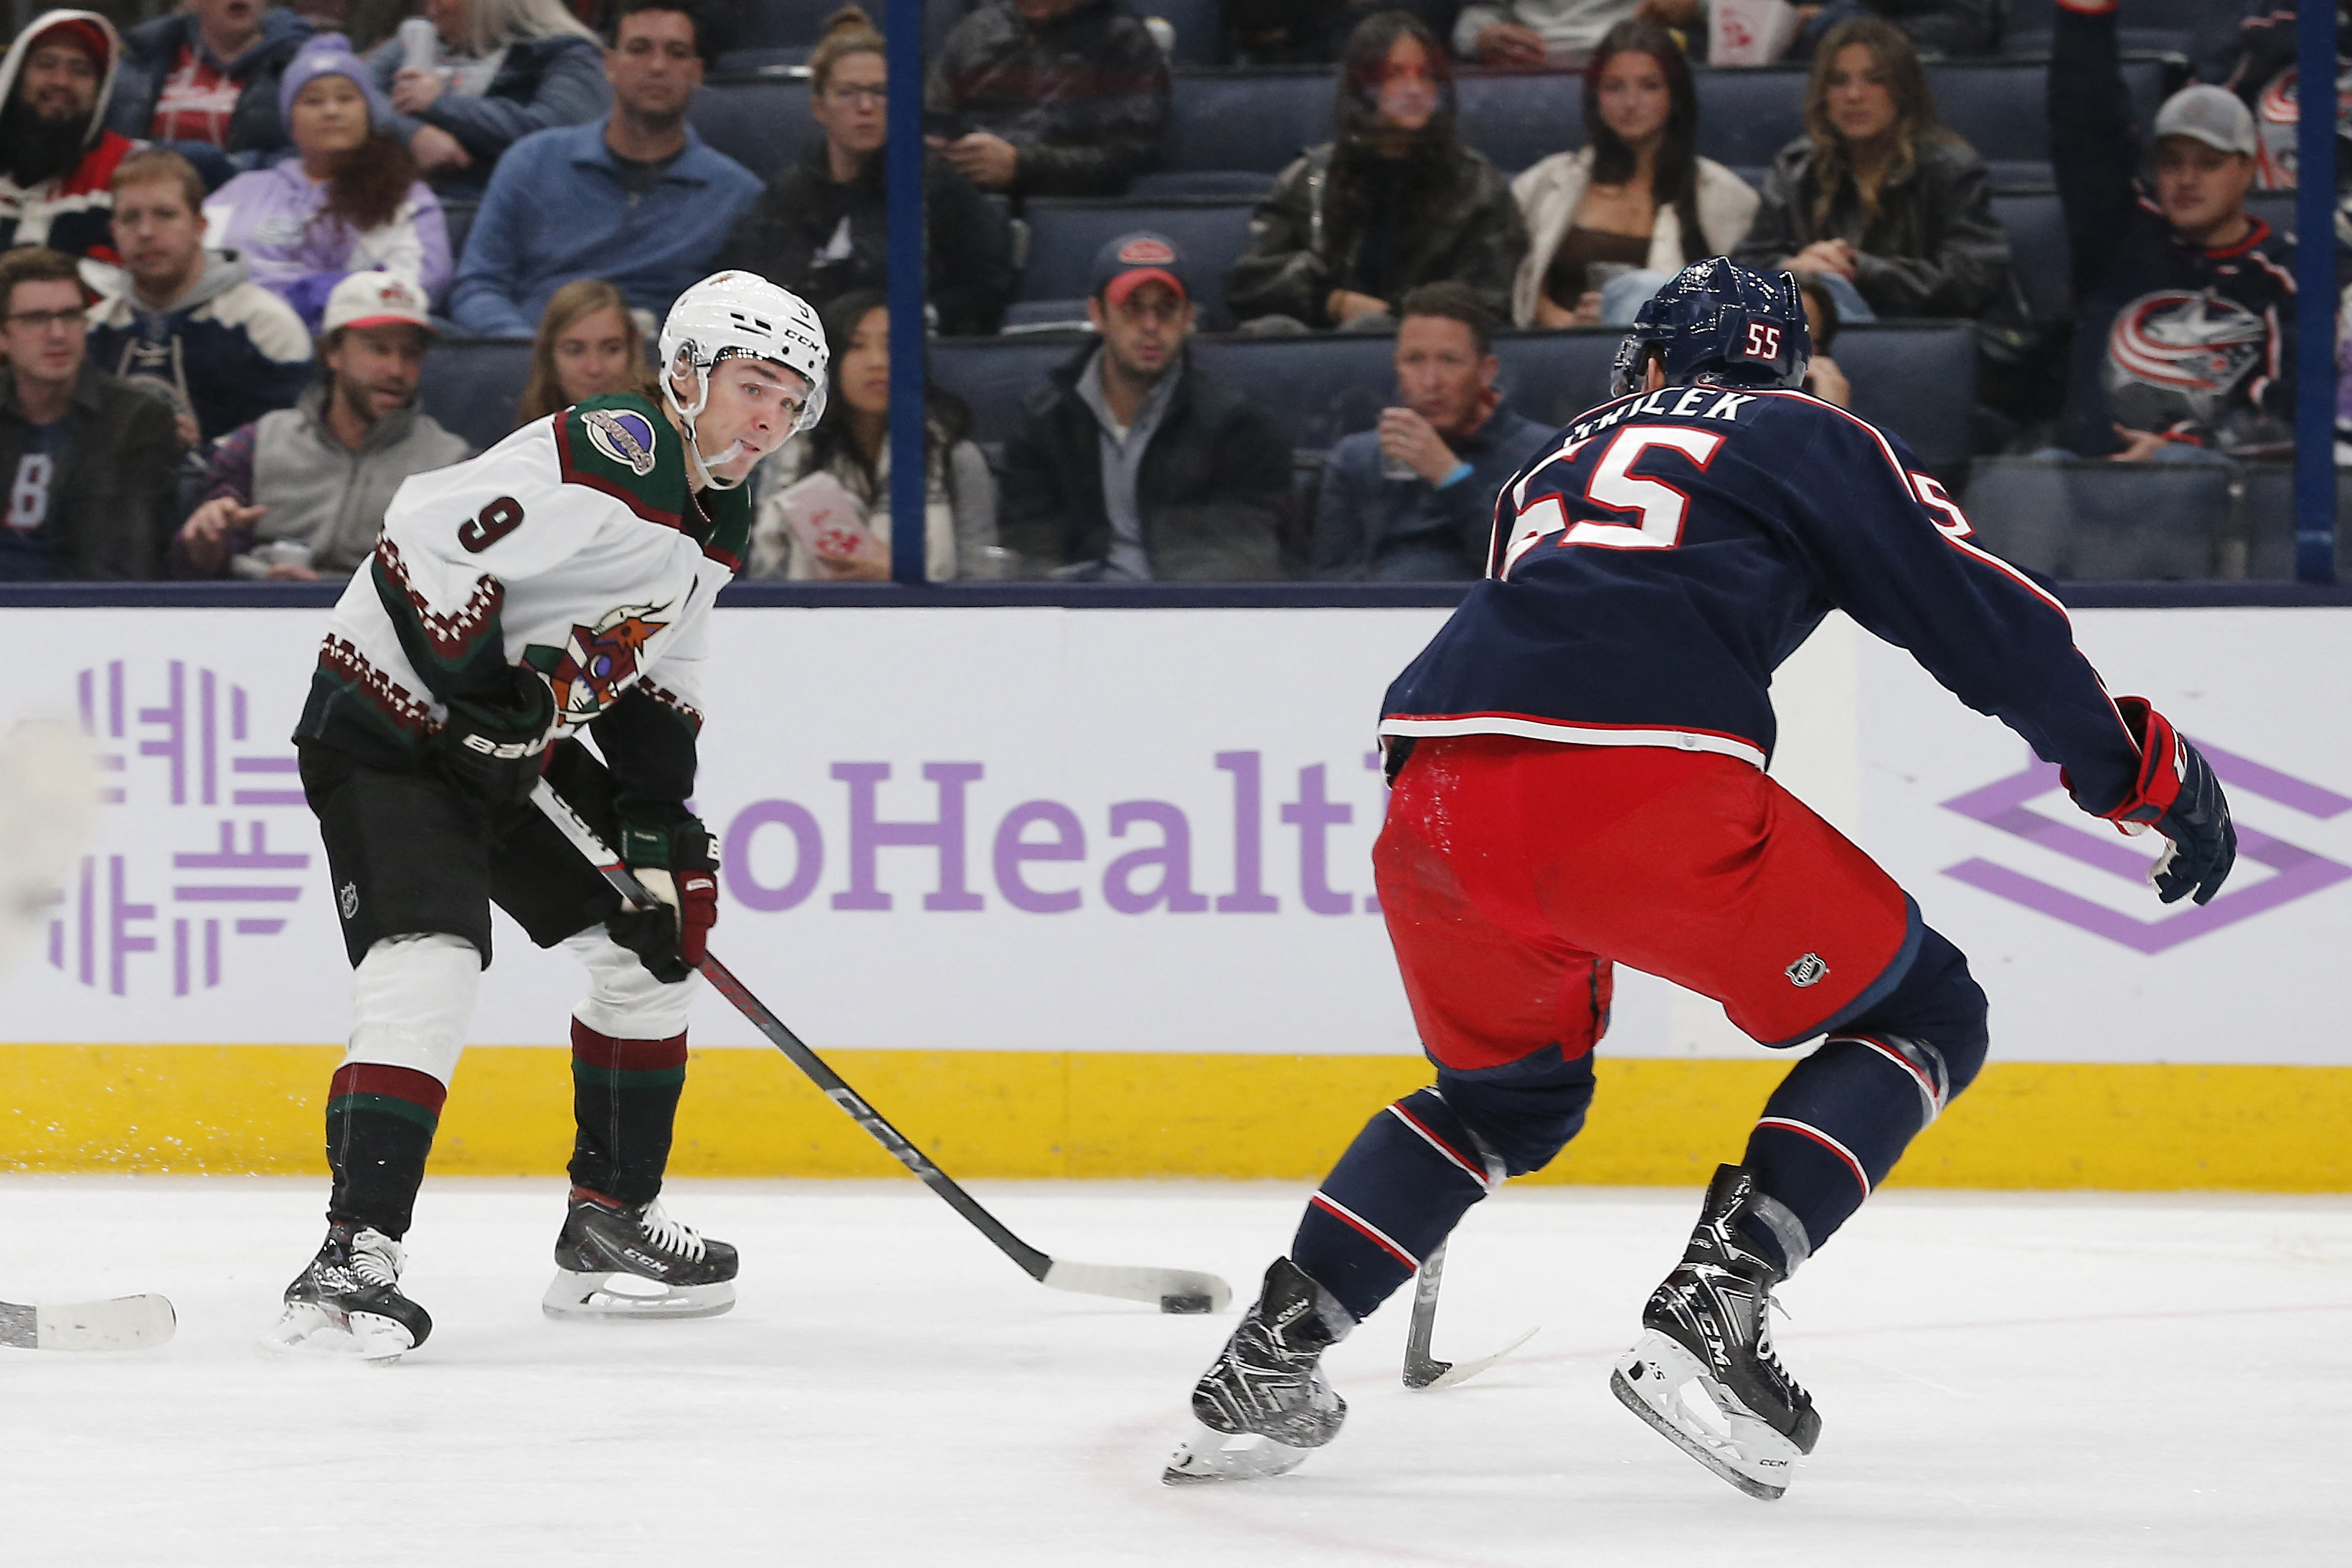 Coyotes score twice in 3rd to extend Blue Jackets’ skid | Reuters